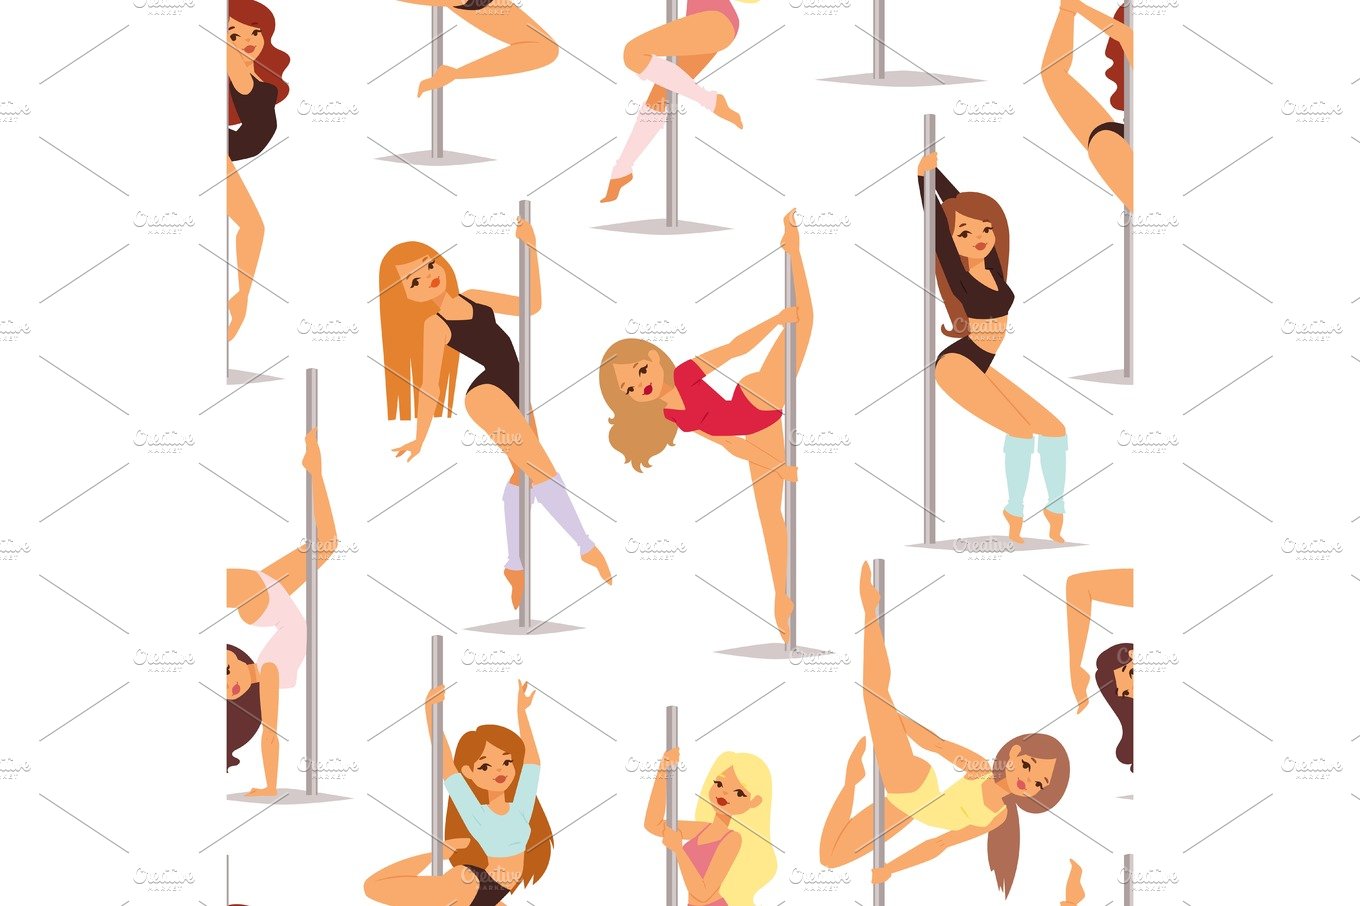 Set of pole dance women cartoon style isolated on white background and youn... cover image.